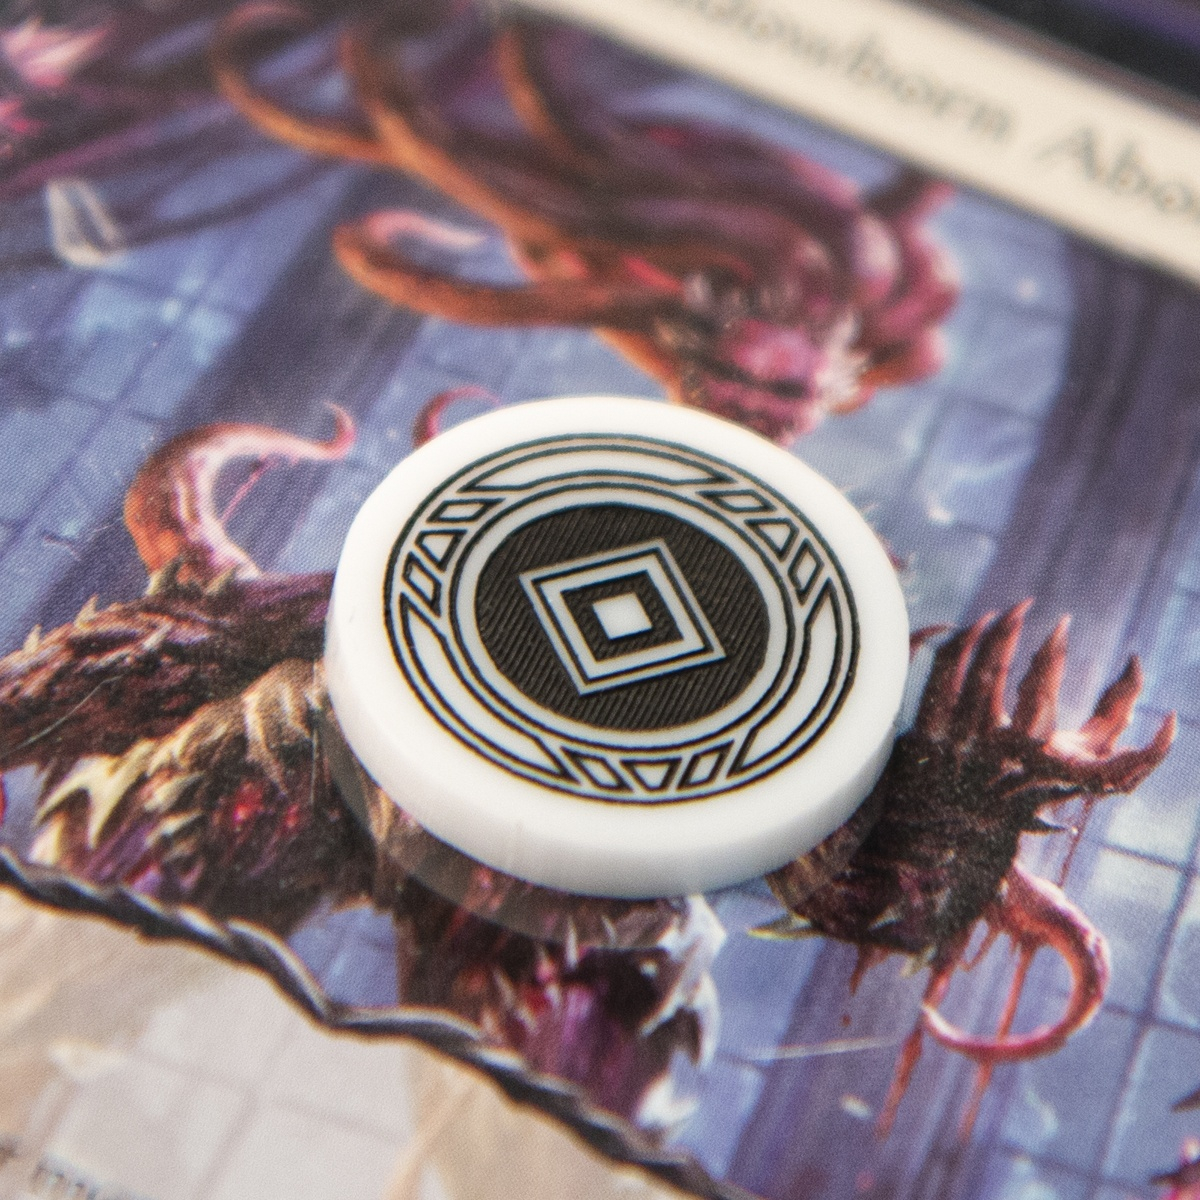 Extreme close up of the Activation Token from the Majestic Token Set showing the details of the engraving